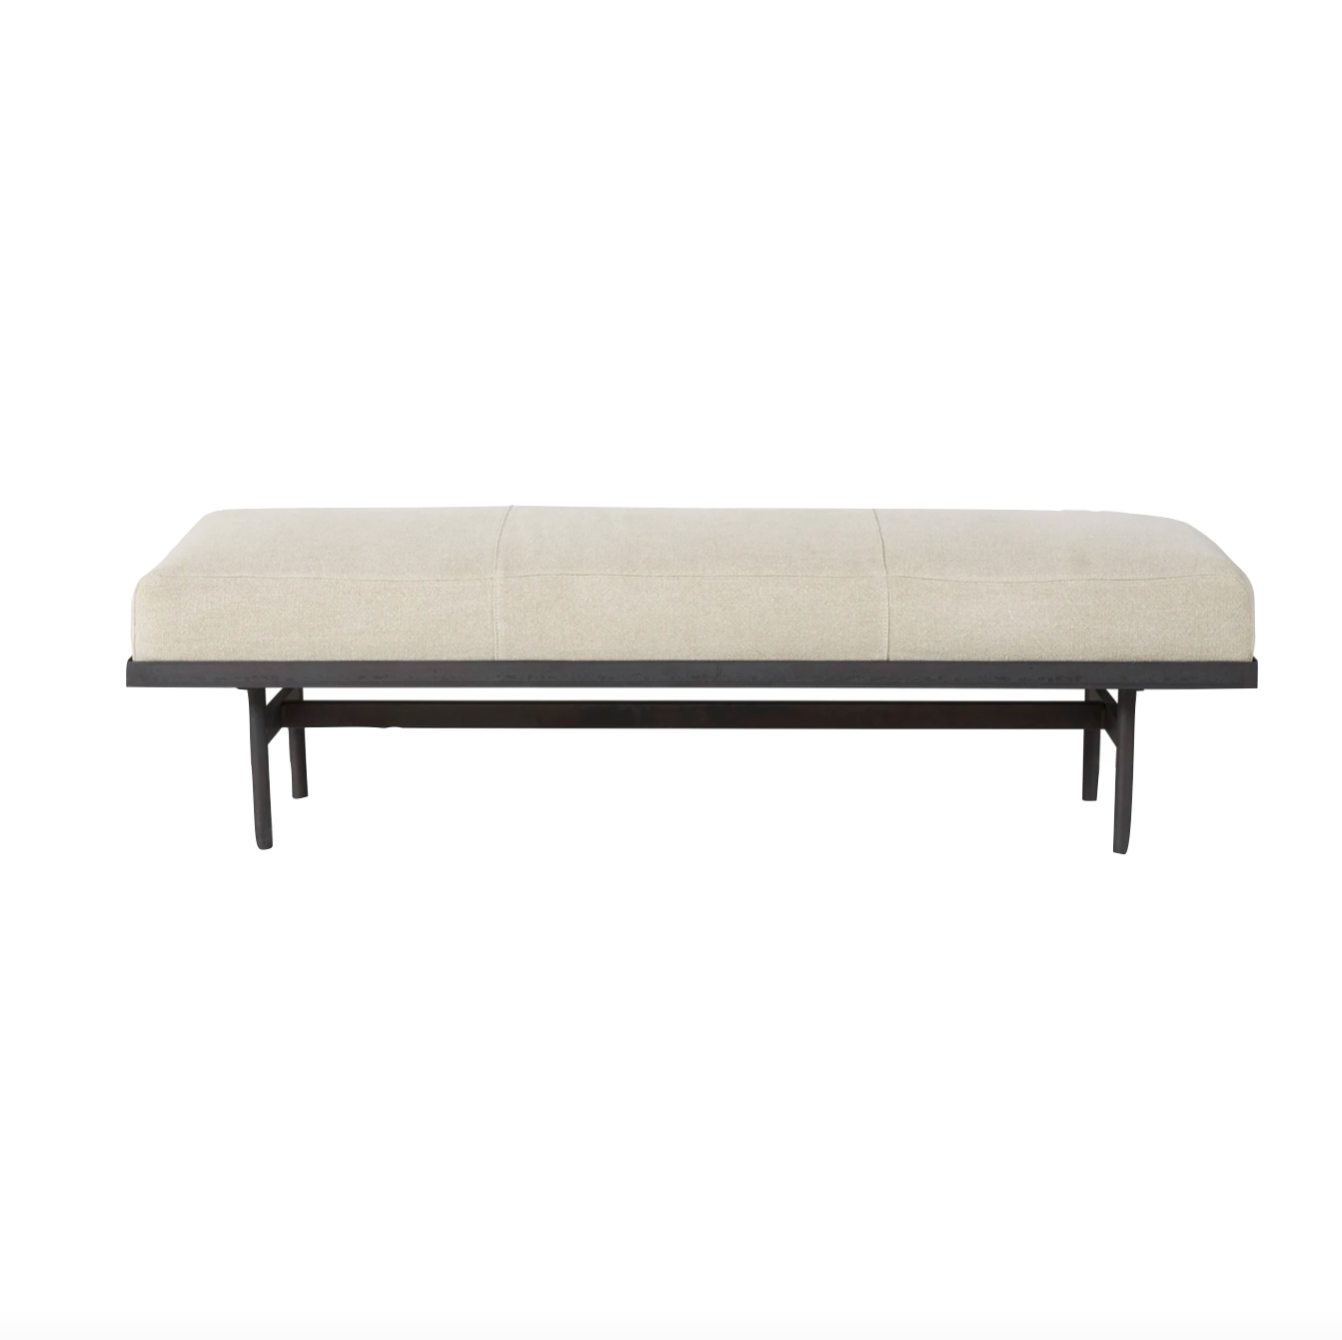 The Lincoln Upholstered Bench by Cisco Brothers is an Amethyst favorite, crafted to perfection with a metal base and your choice of fabric. Photographed in Brevard Burlap.   Overall dimensions: 60"w x 18"d x 17"h